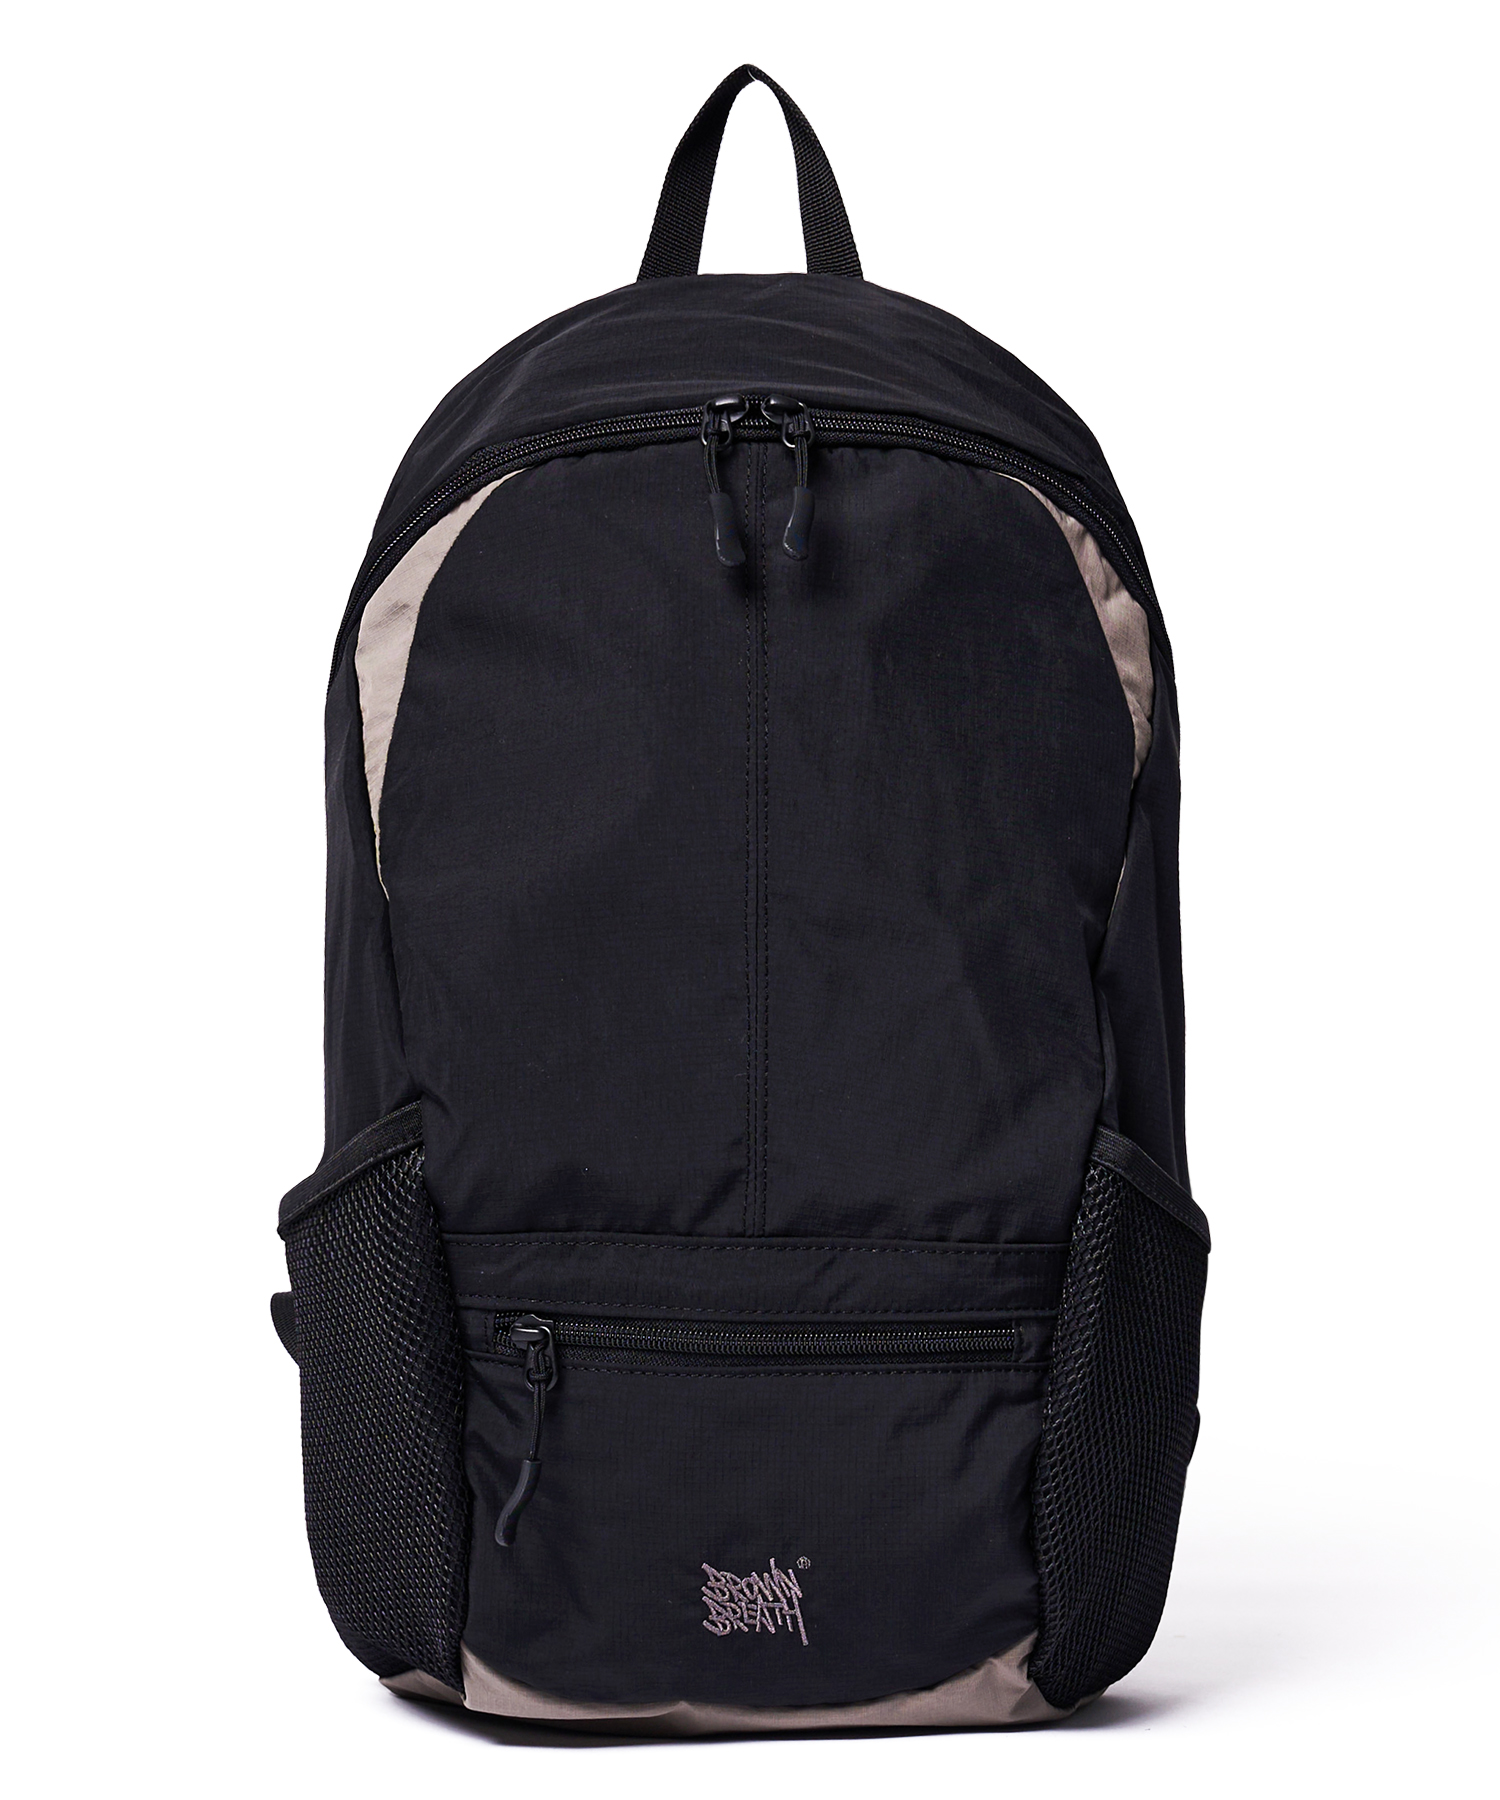 ACTS PACKABLE BACKPACK - BLACK